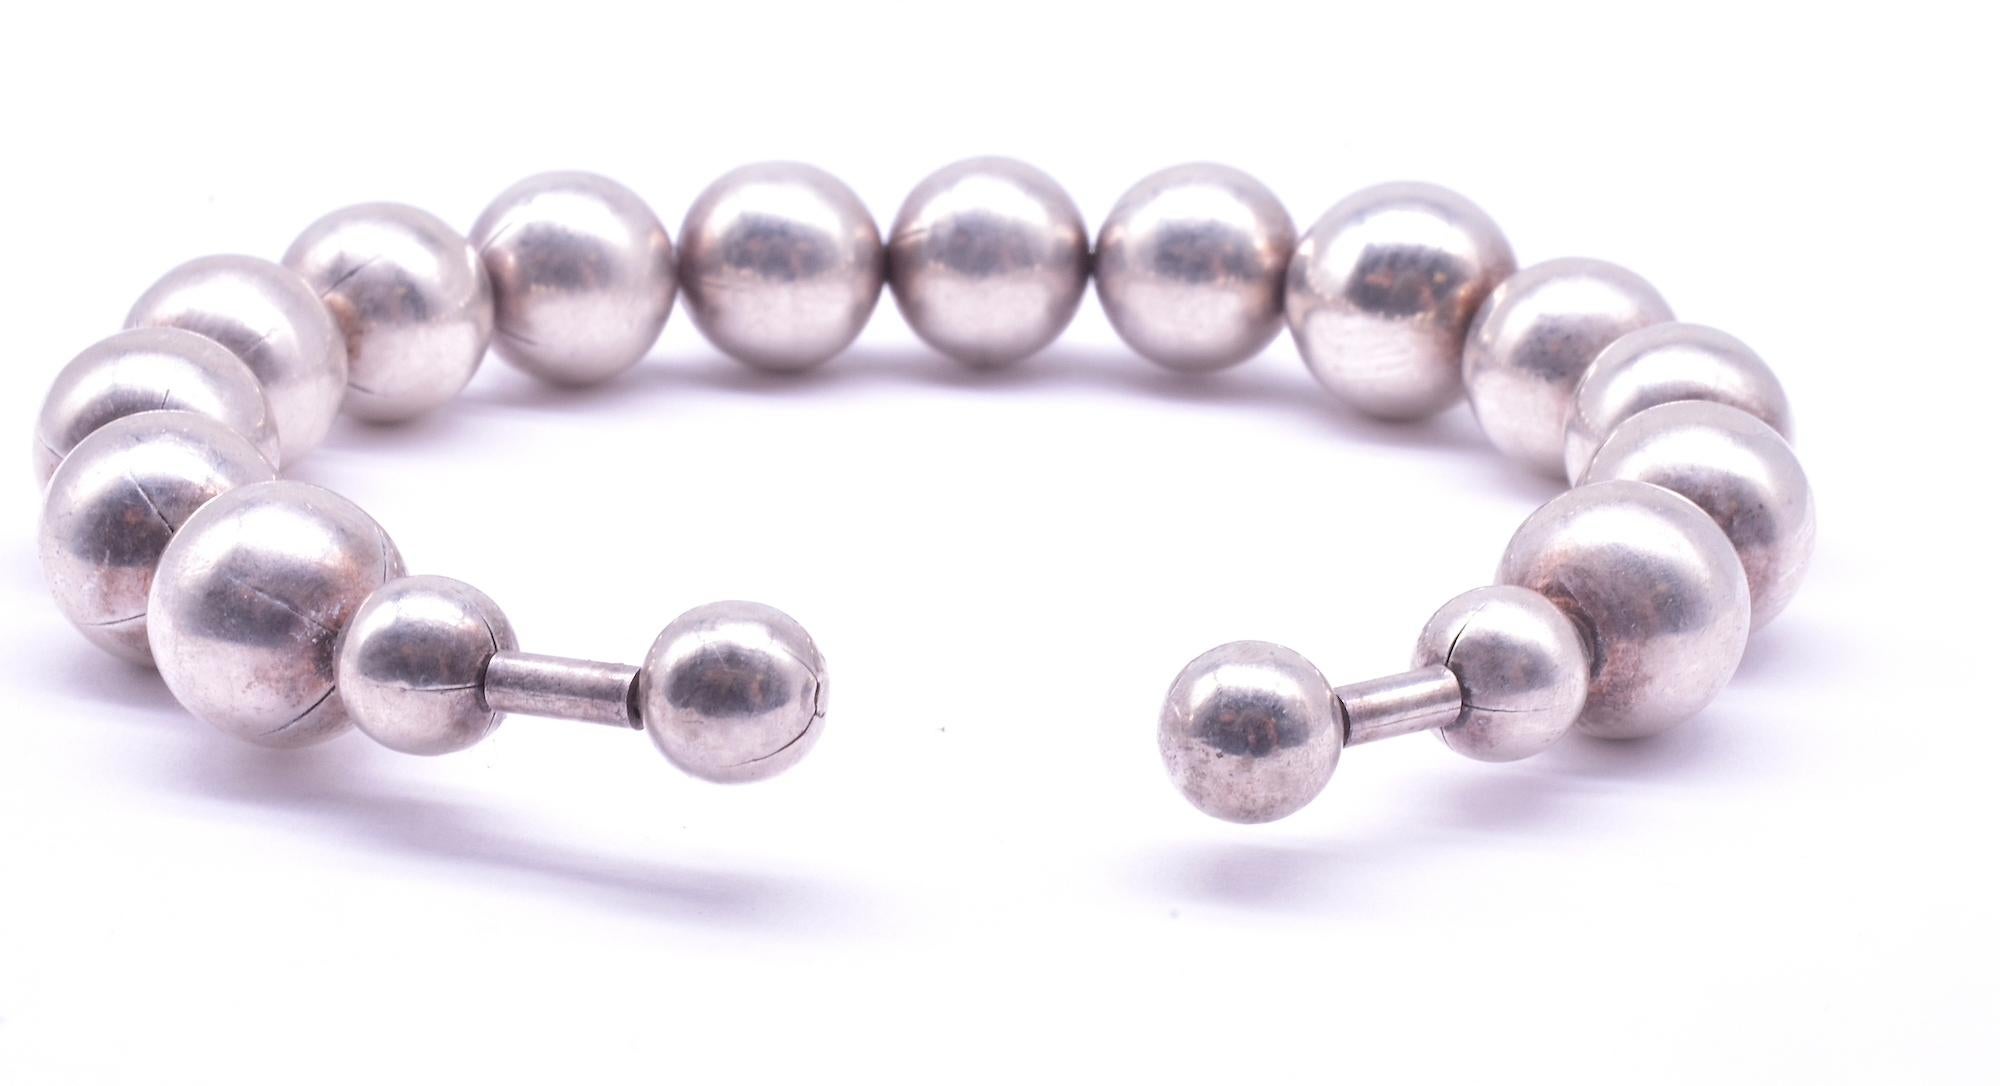 Retro Flexible Bracelet of Graduated 925 Sterling Silver Balls In Excellent Condition For Sale In Baltimore, MD